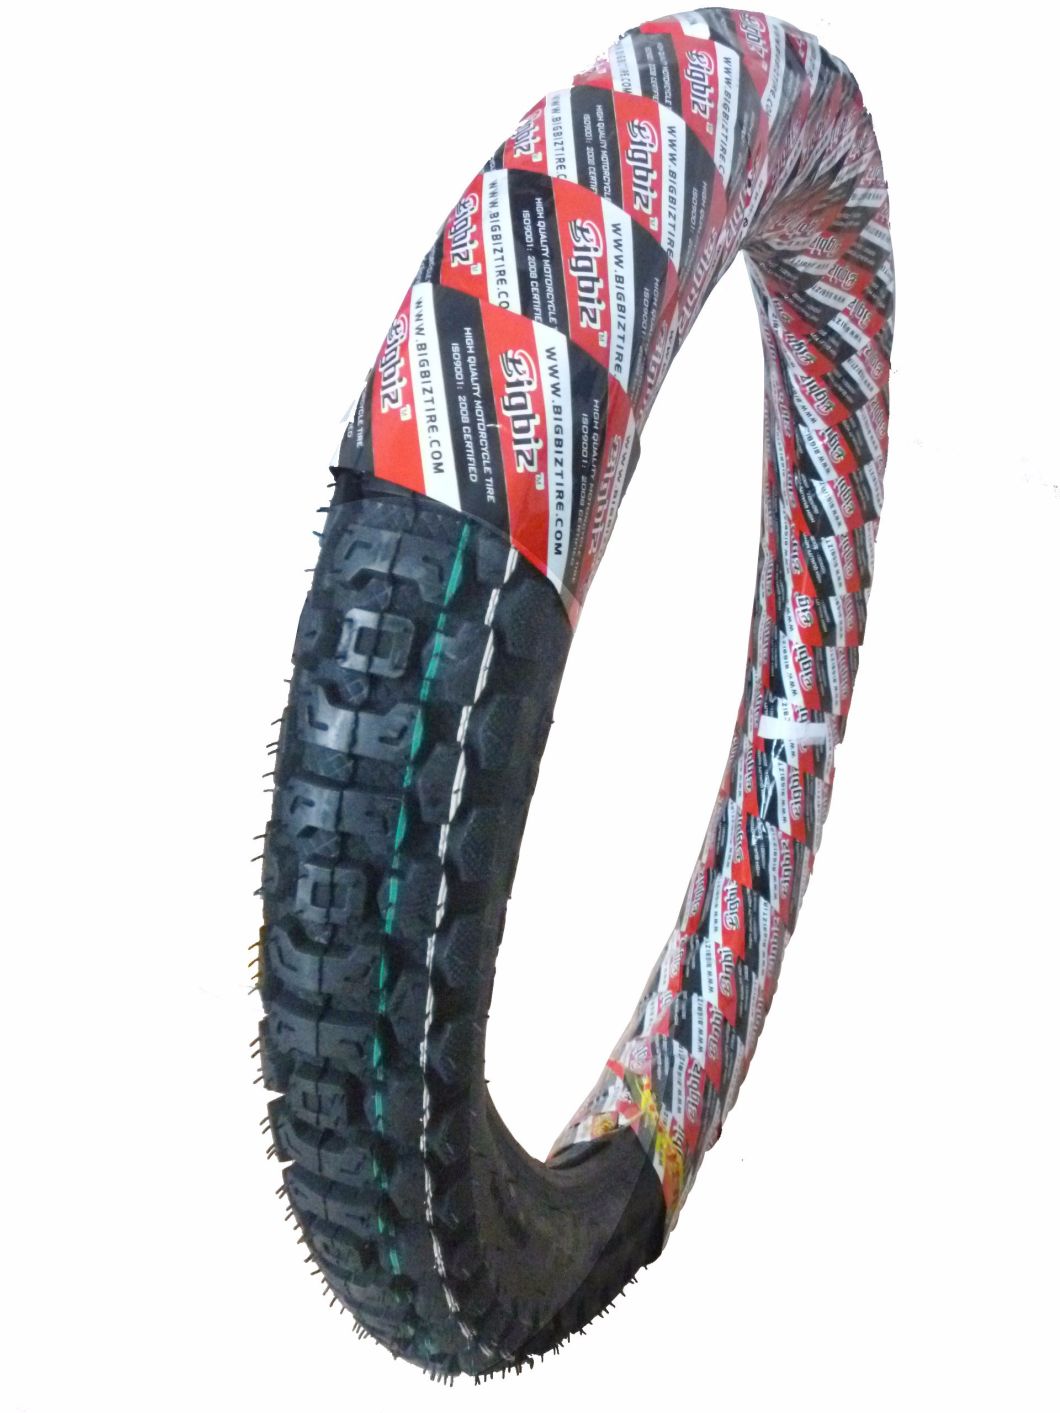 High Quality Motorcycle Tyre (2.25-17) with High Natural Rubber Rate.